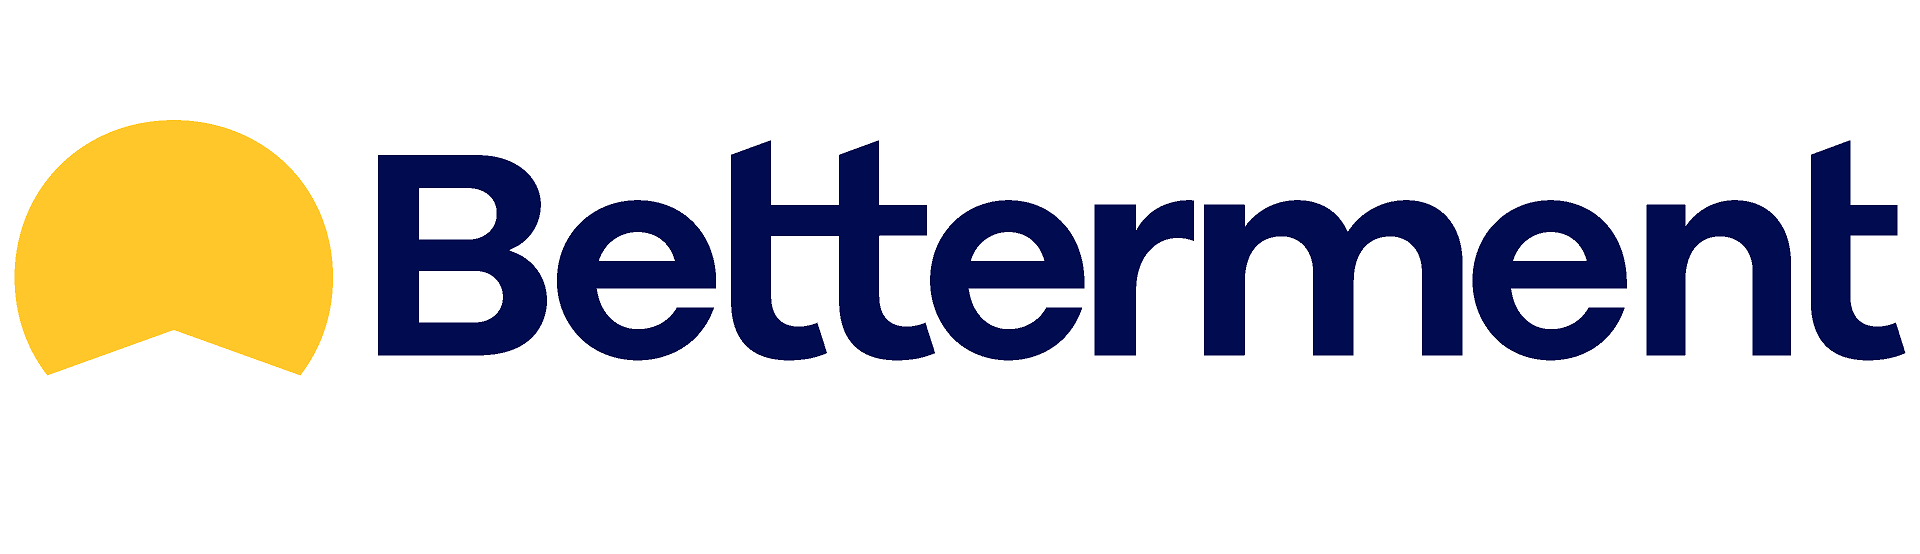 Make Investment Easy with Betterment